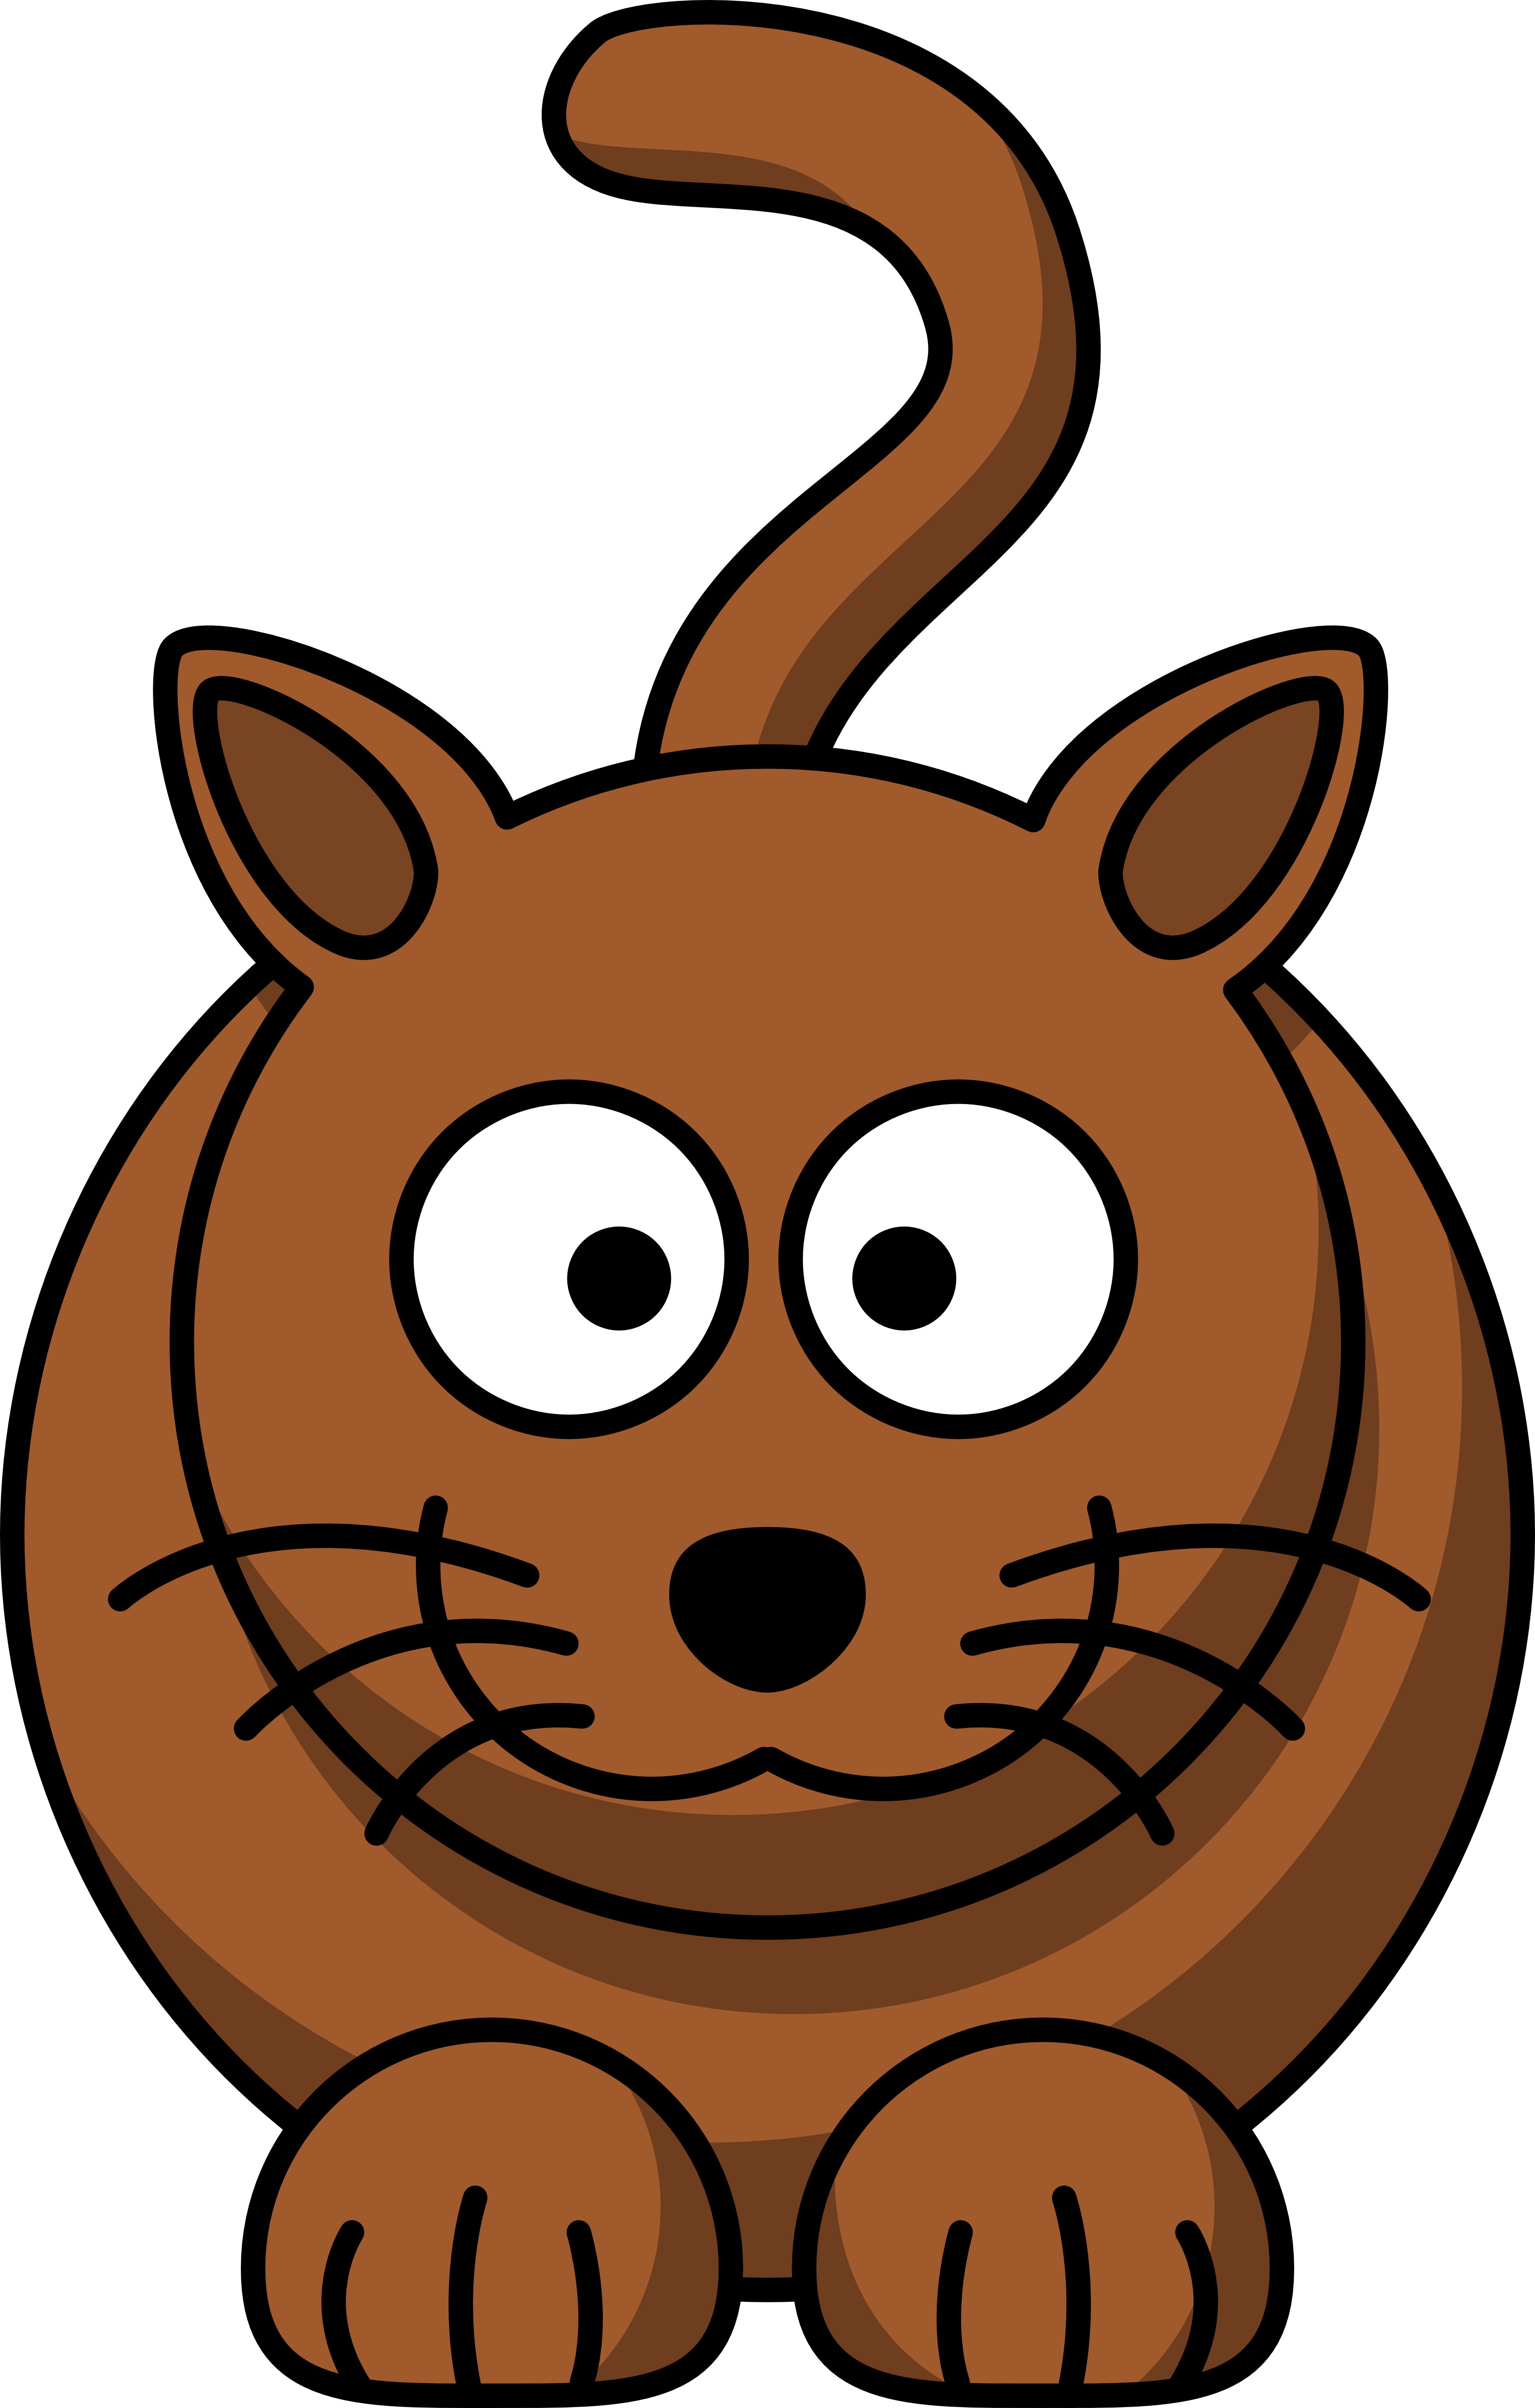 Picture Of A Cartoon Cat - ClipArt Best